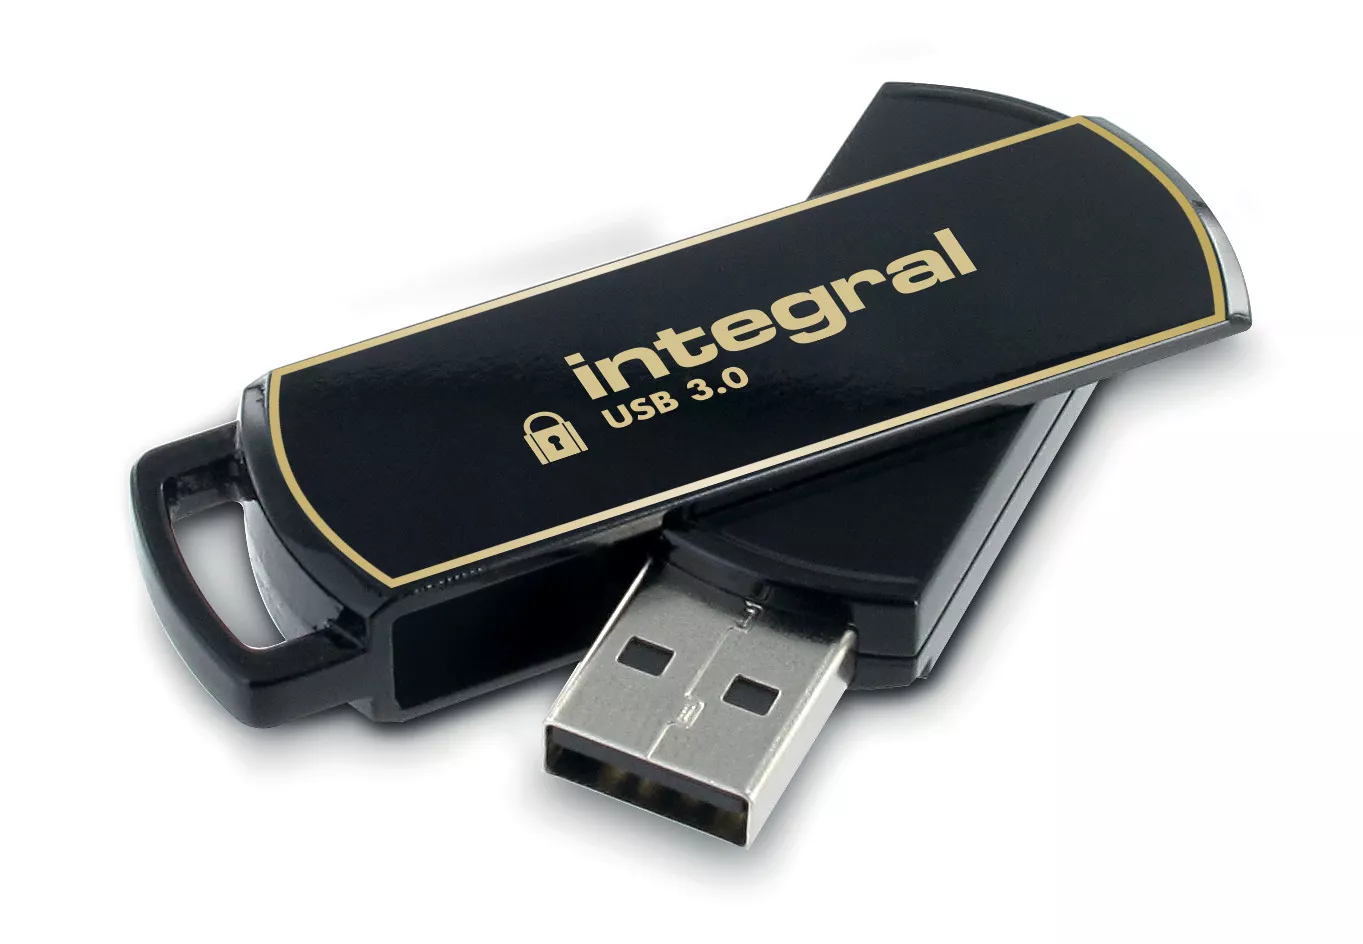 Achat Adaptateur stockage Integral 8GB Crypto Drive FIPS 197 Encrypted USB 3.0 sur hello RSE